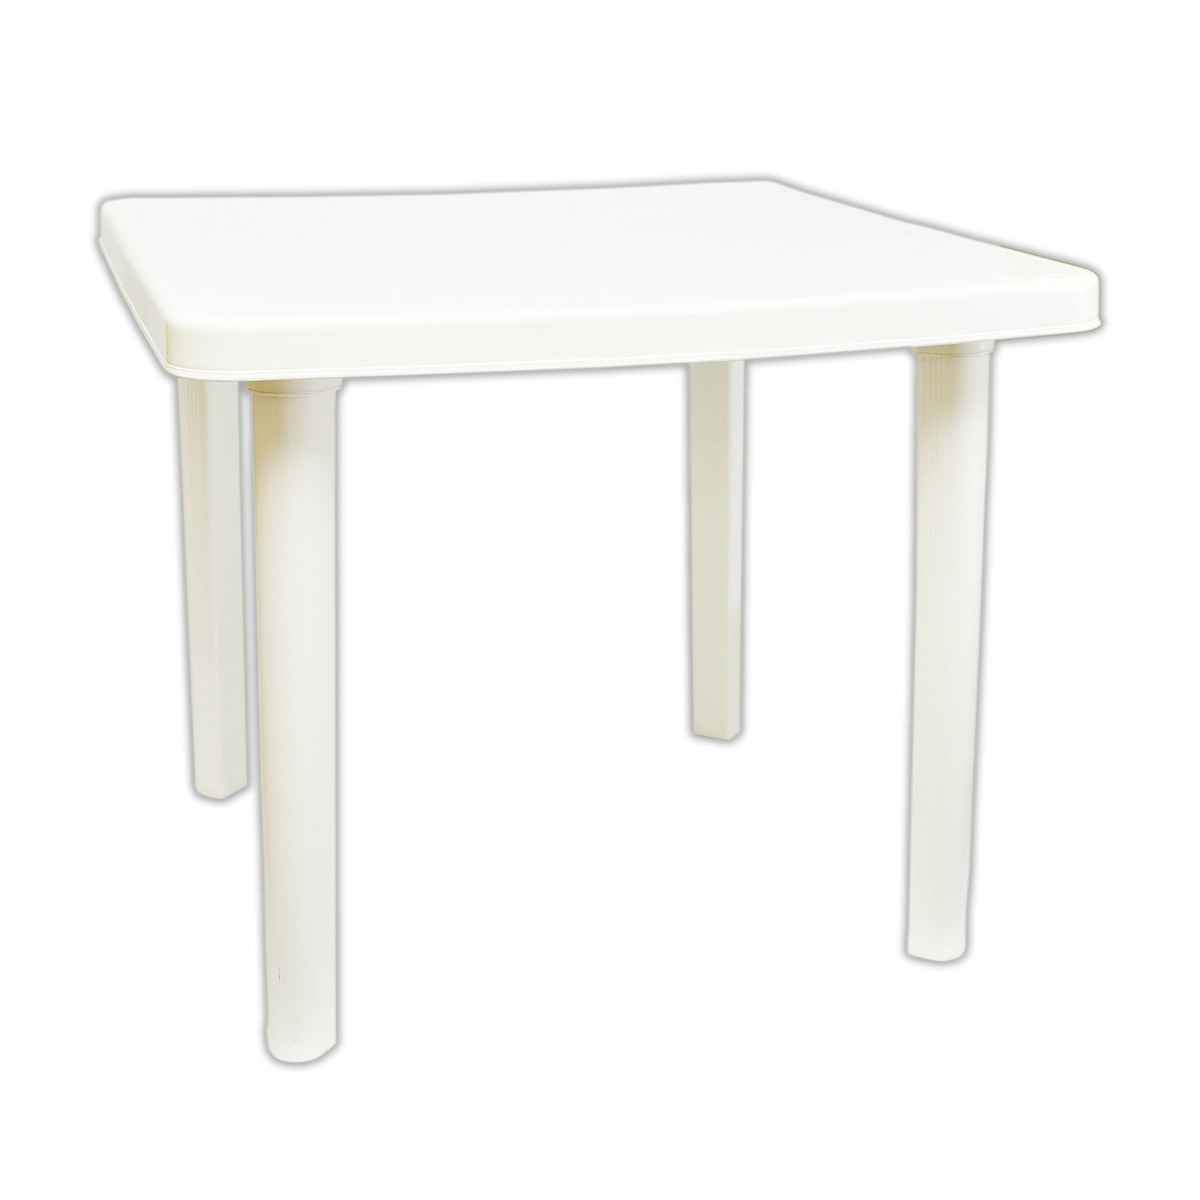 Home Needs Plastic Square Table 52895, Assorted colors, per pc